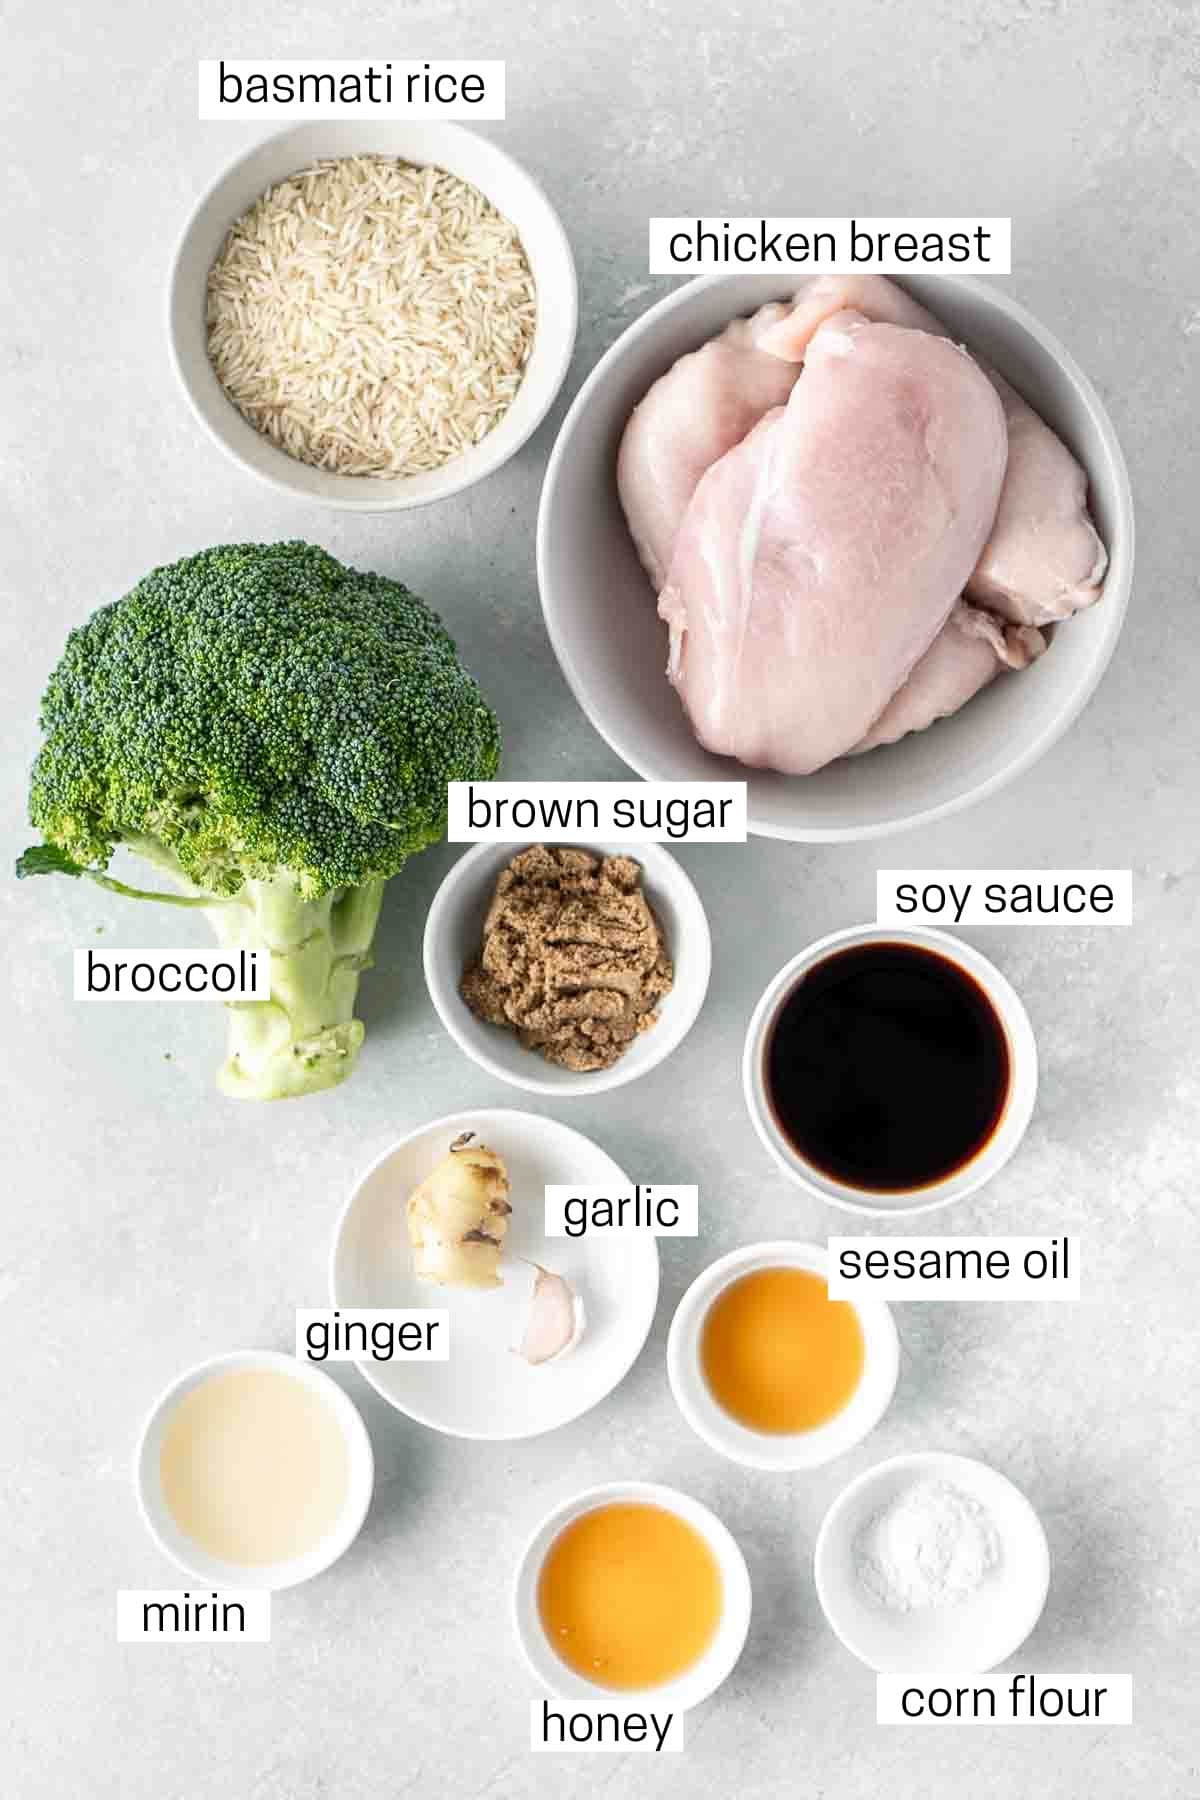 All ingredients needed for teriyaki chicken meal prep laid out in bowls.